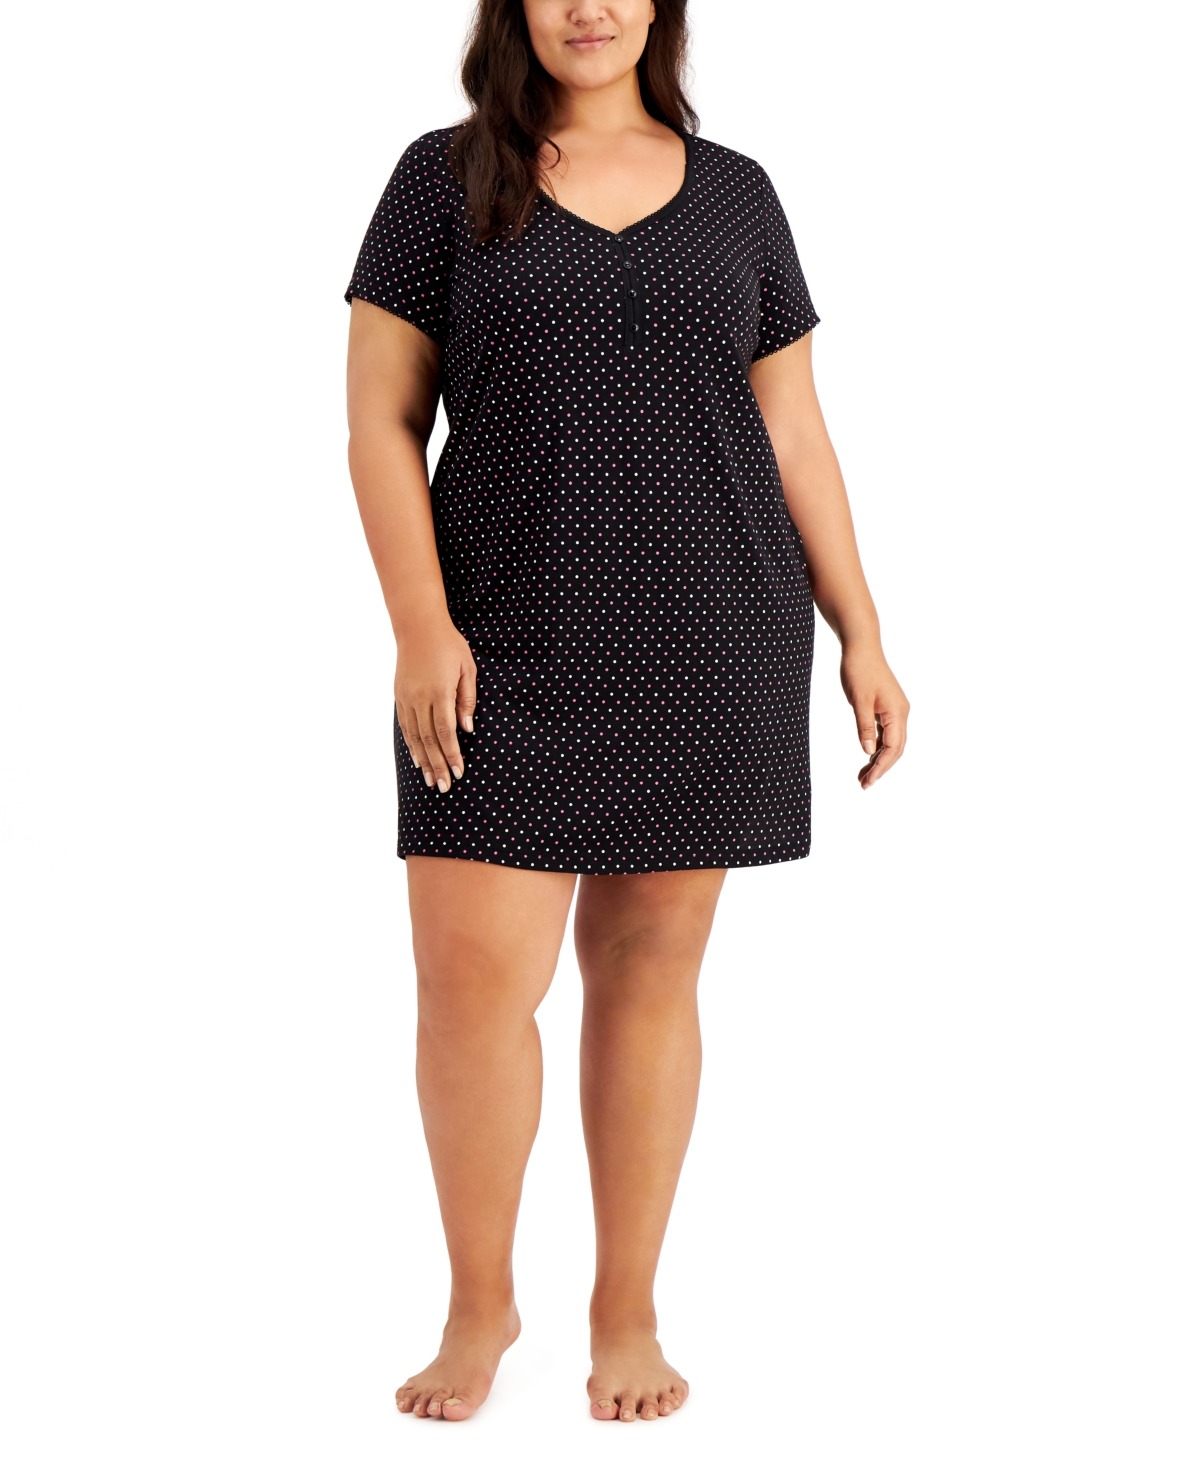 Charter Club The Everyday Cotton Plus Size Sleep Shirt, Created for Macy's